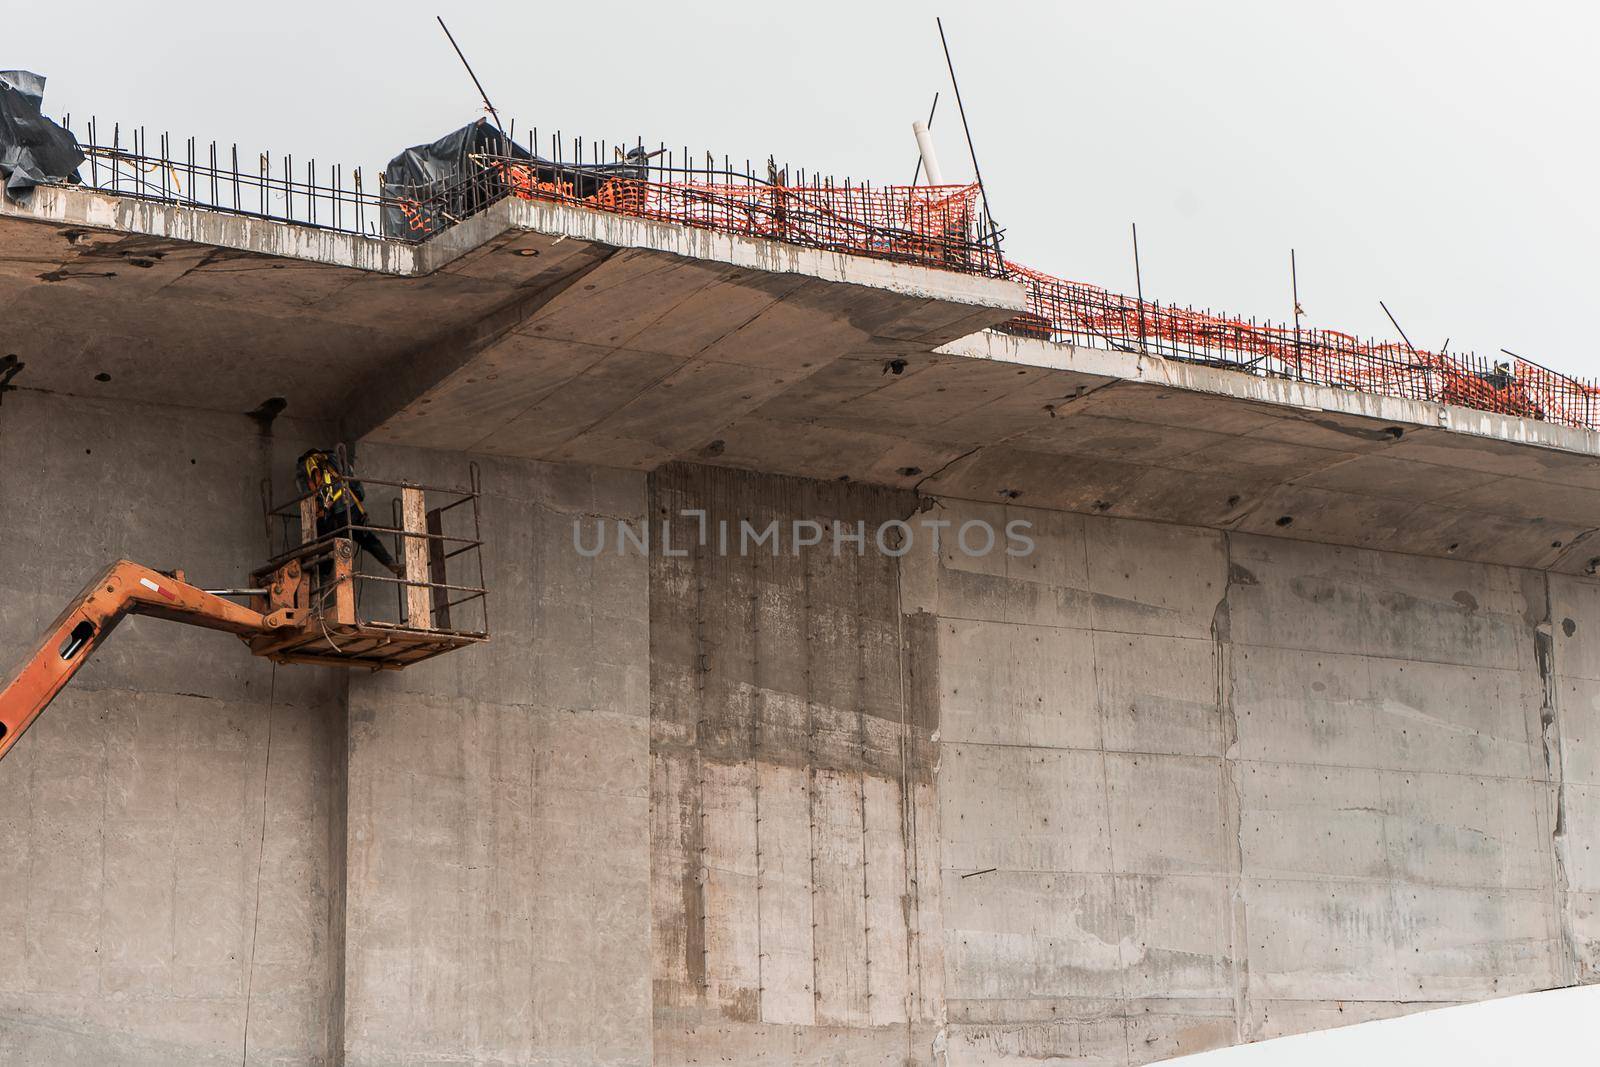 Latin worker doing repairs on a bridge mounted on a crane in Nicaragua, central america